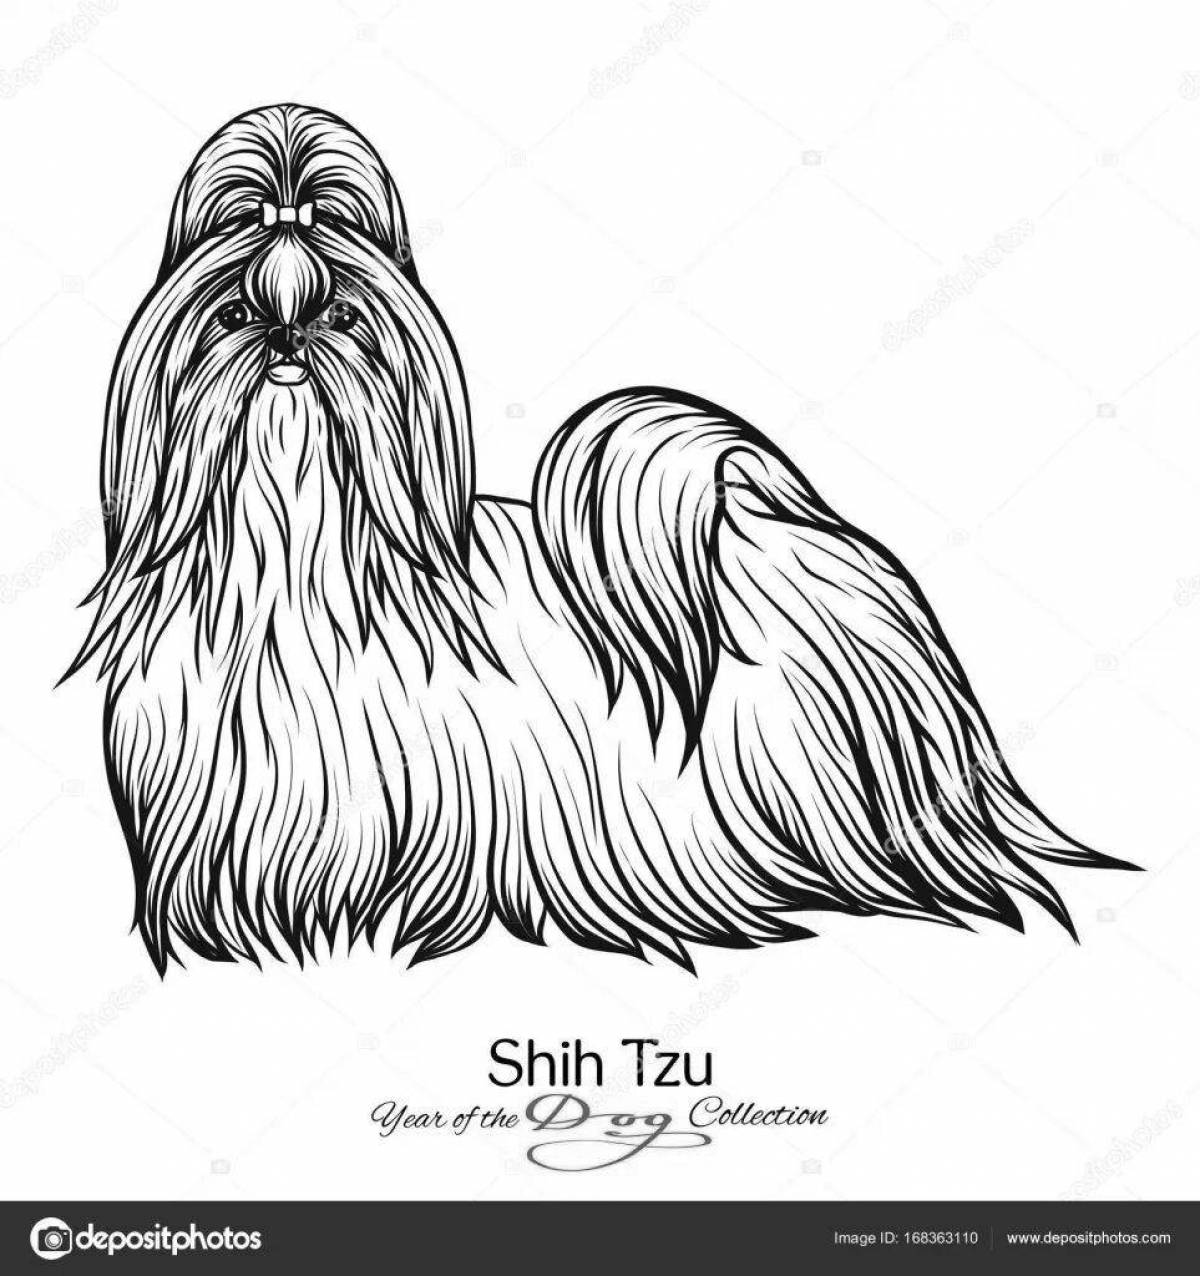 Shih tzu live coloring page